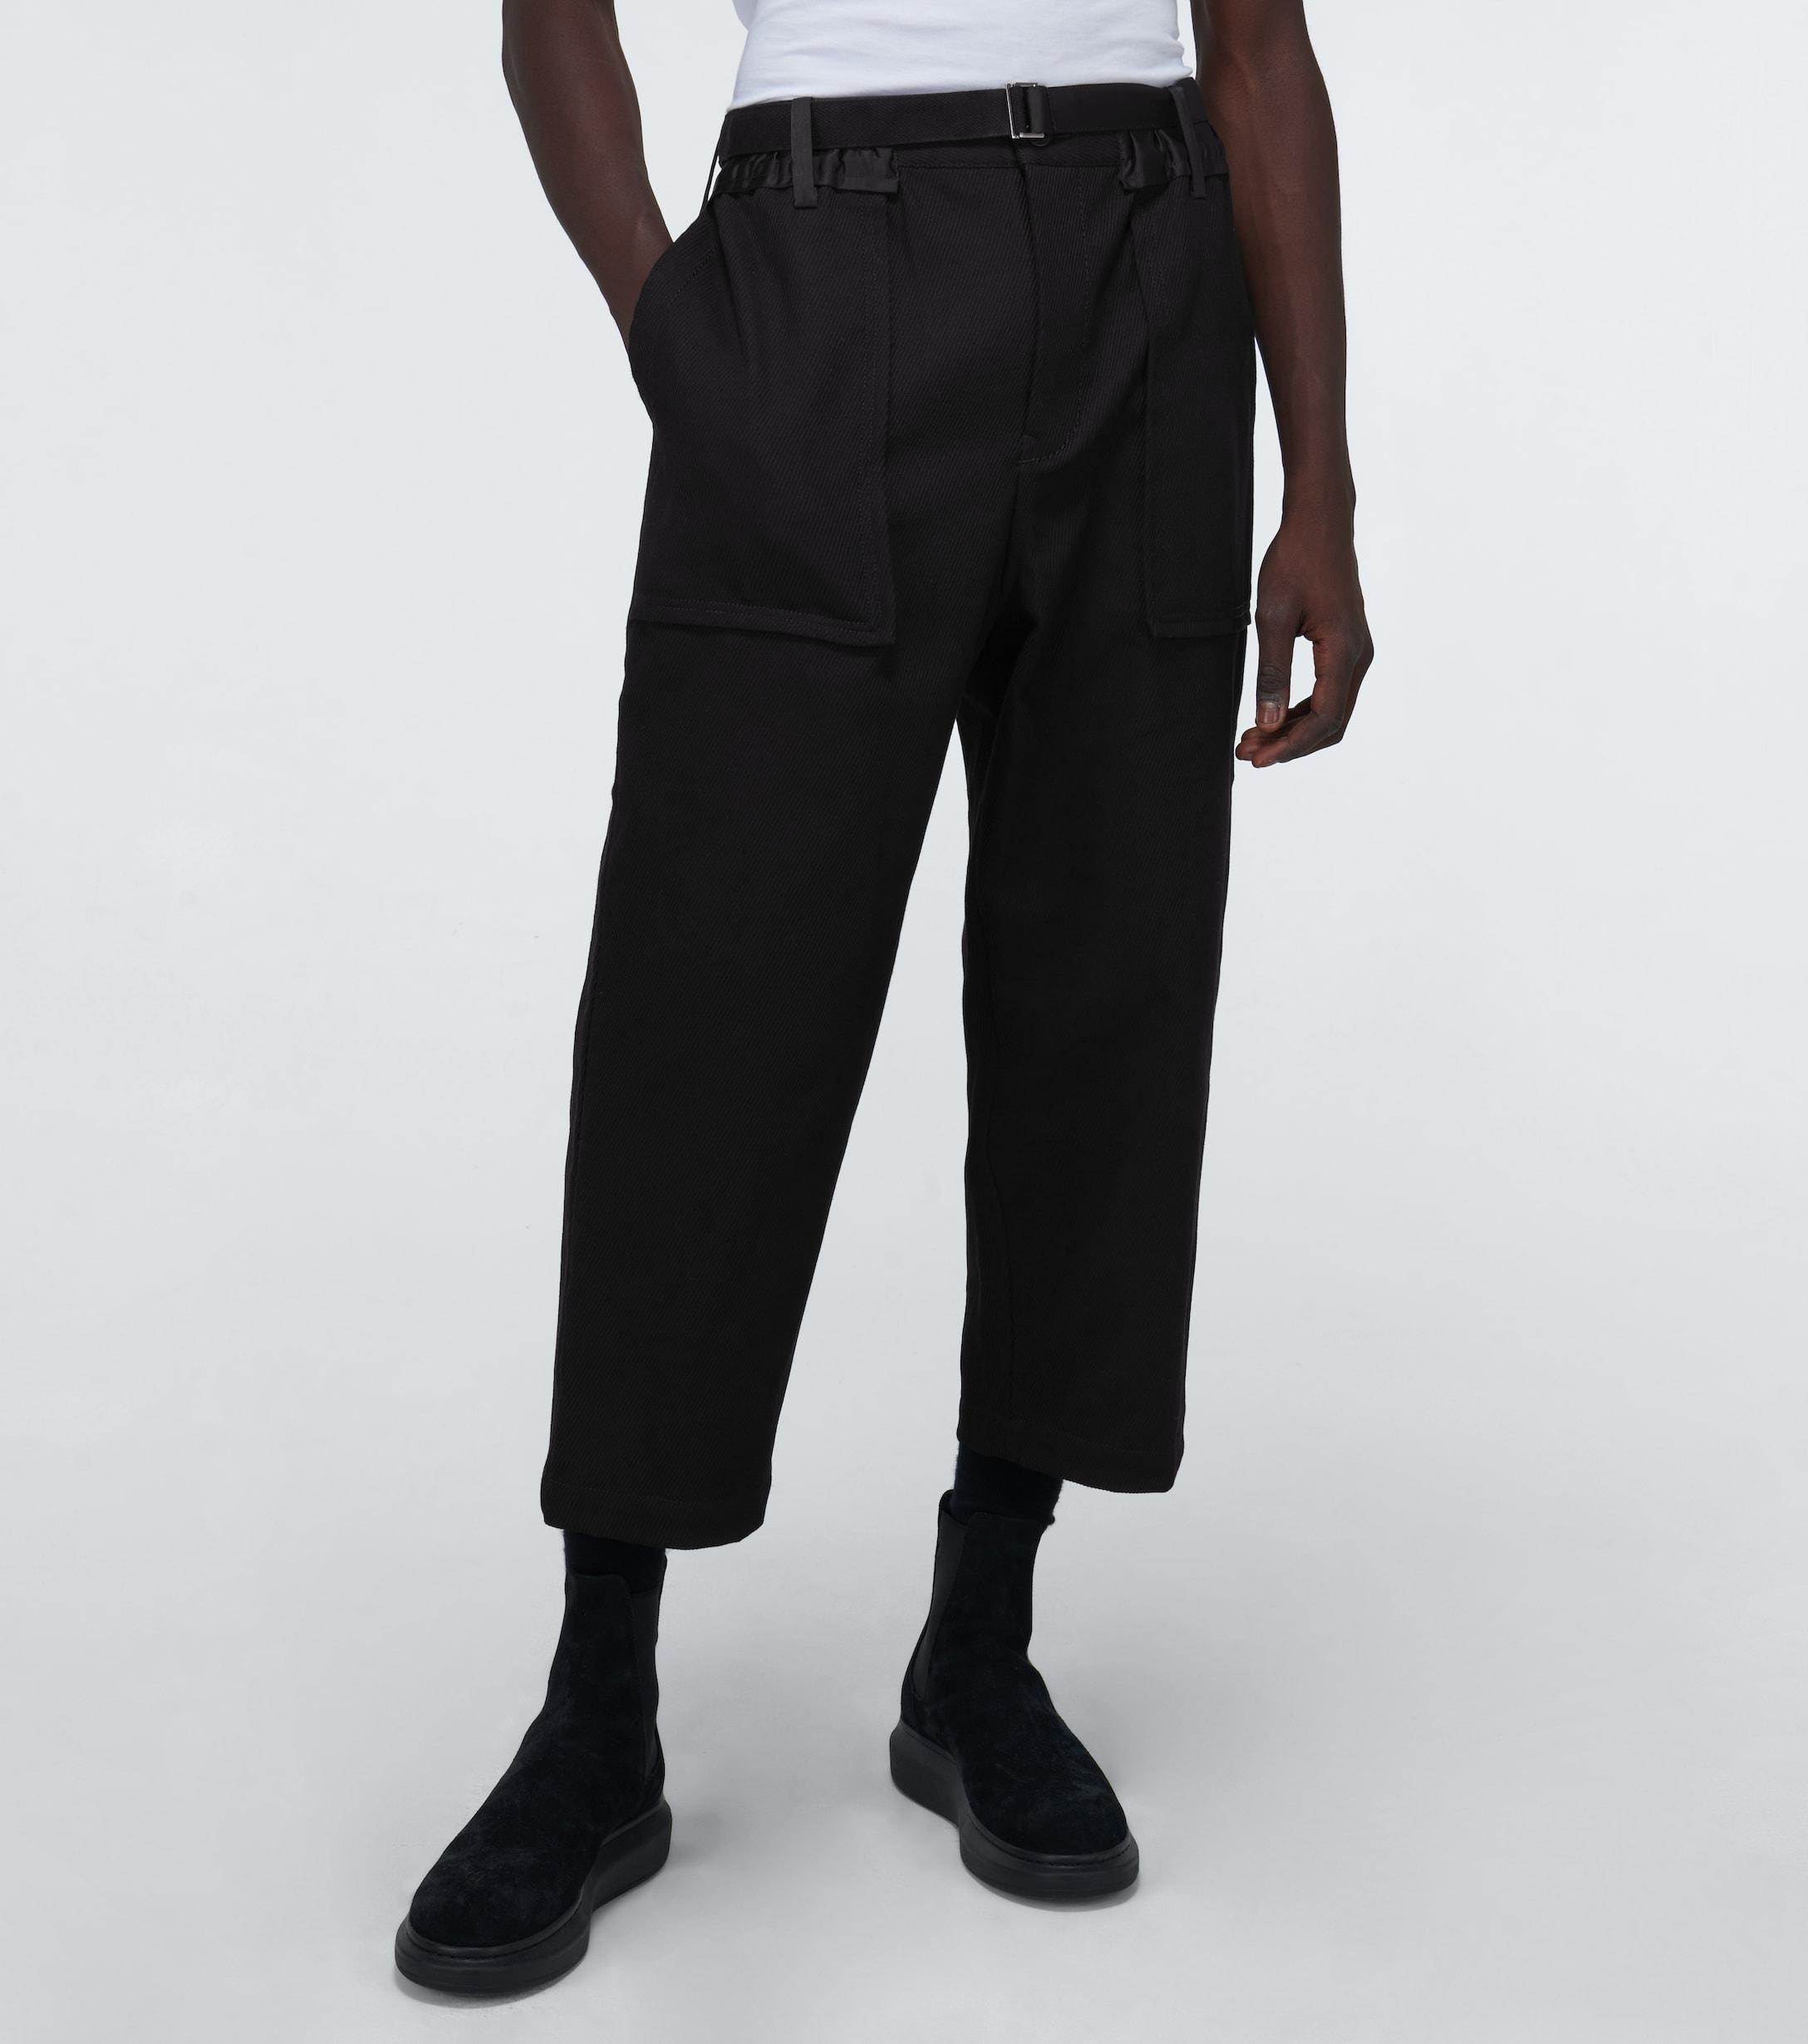 Sacai Cotton Twill Belted Pants in Black for Men - Lyst